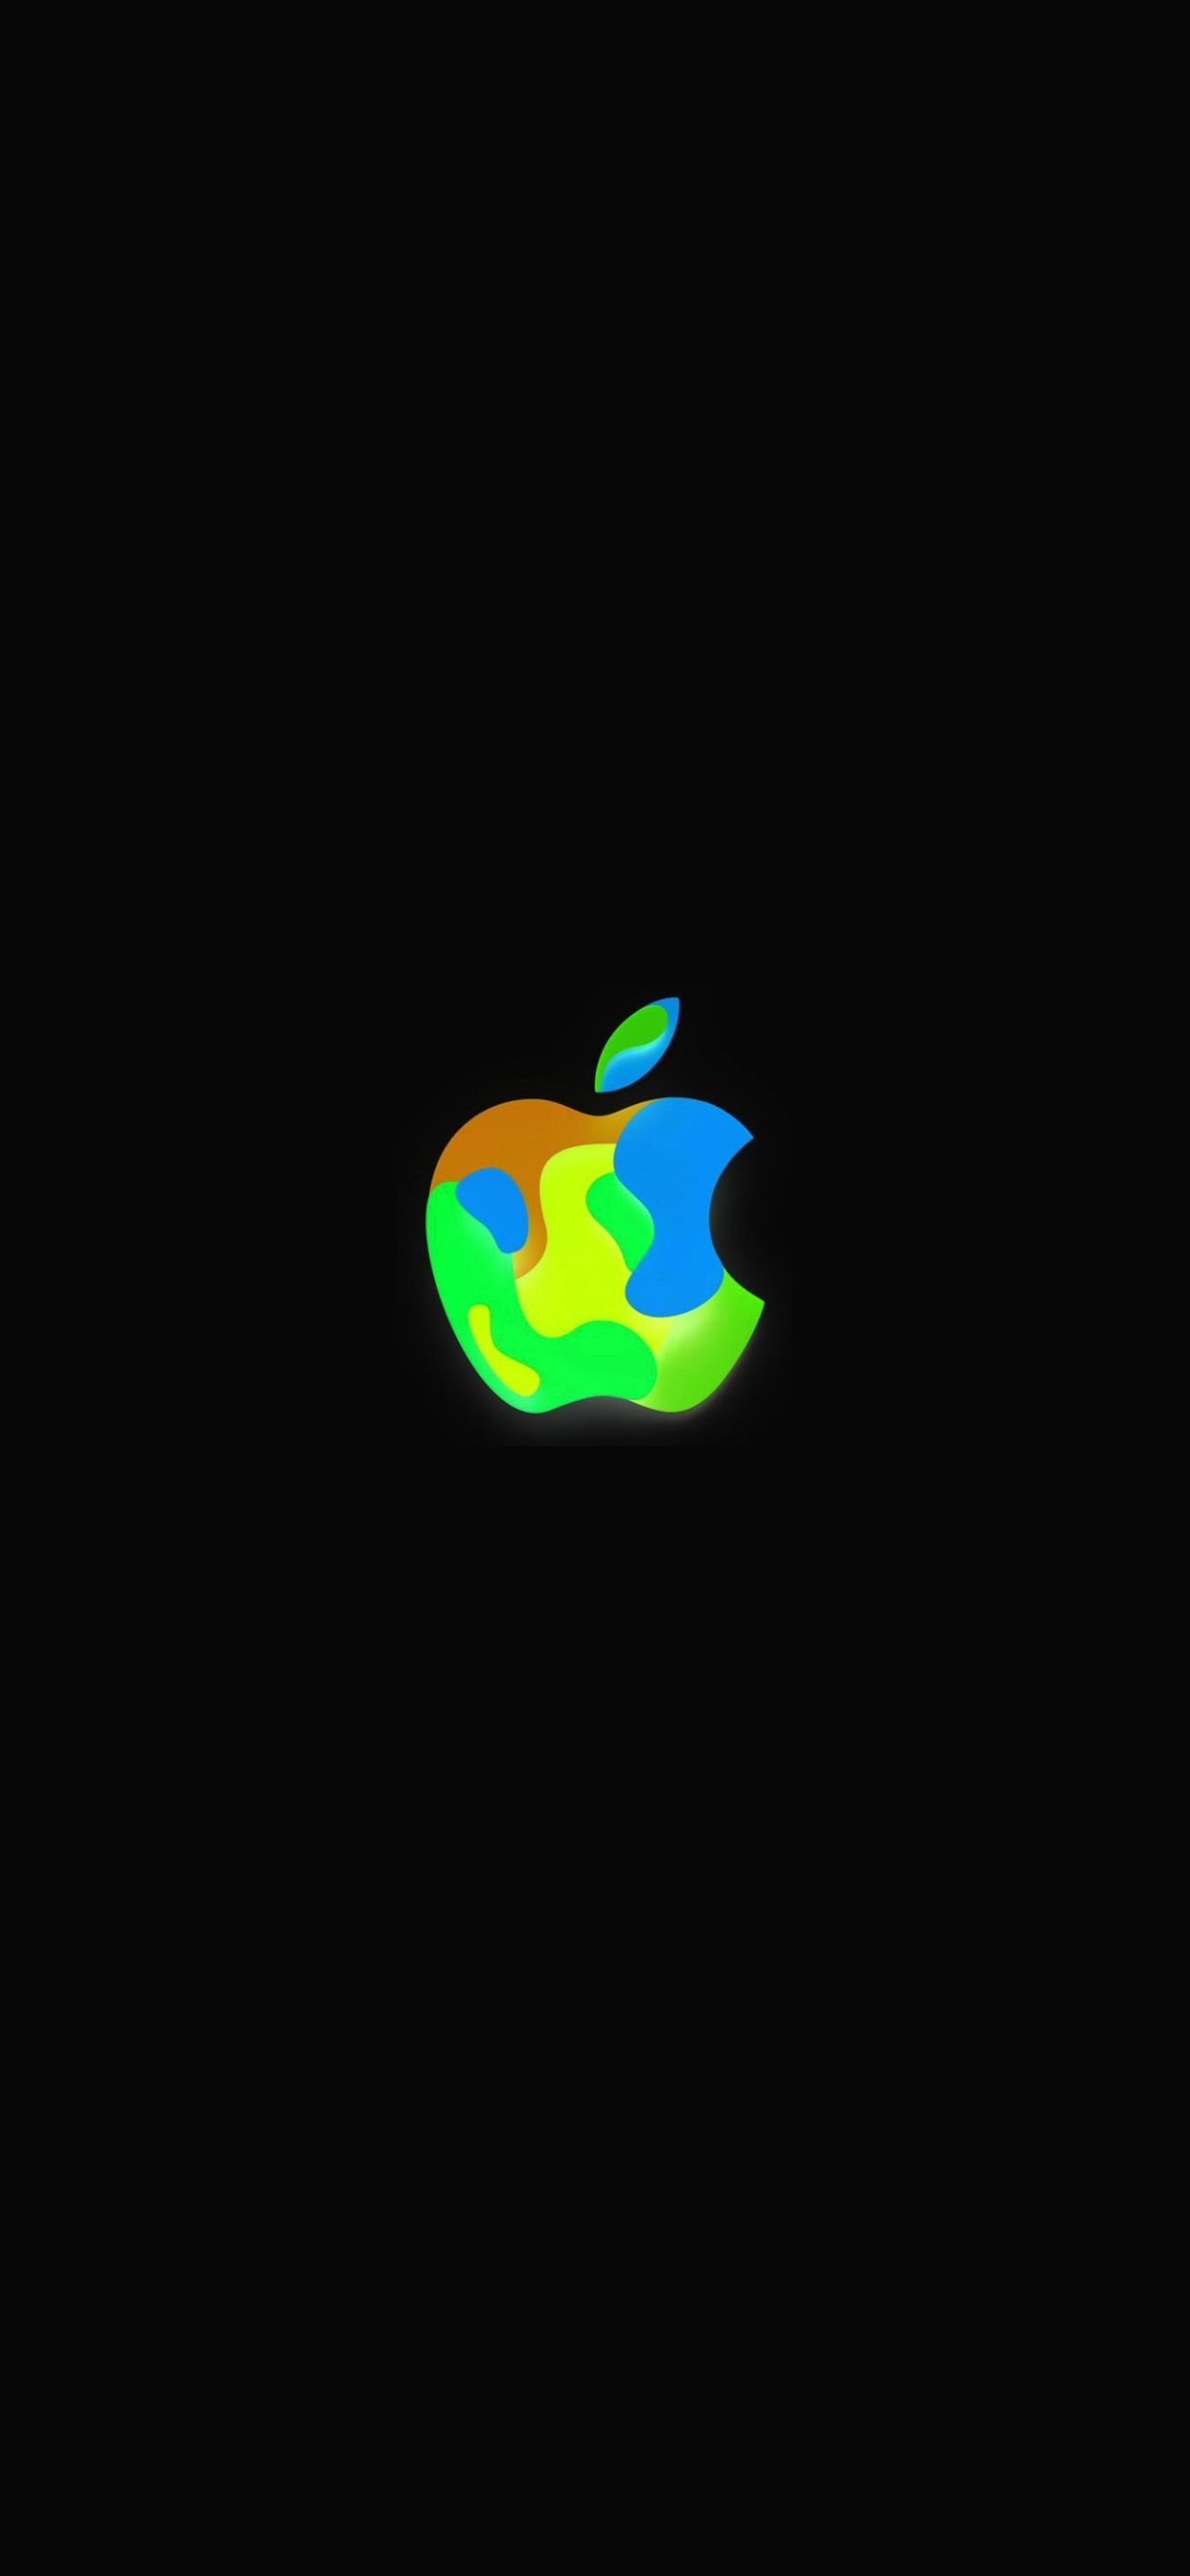 The most EXCITING Apple event in a DECADE Apple Reality wwdc23  YouTube